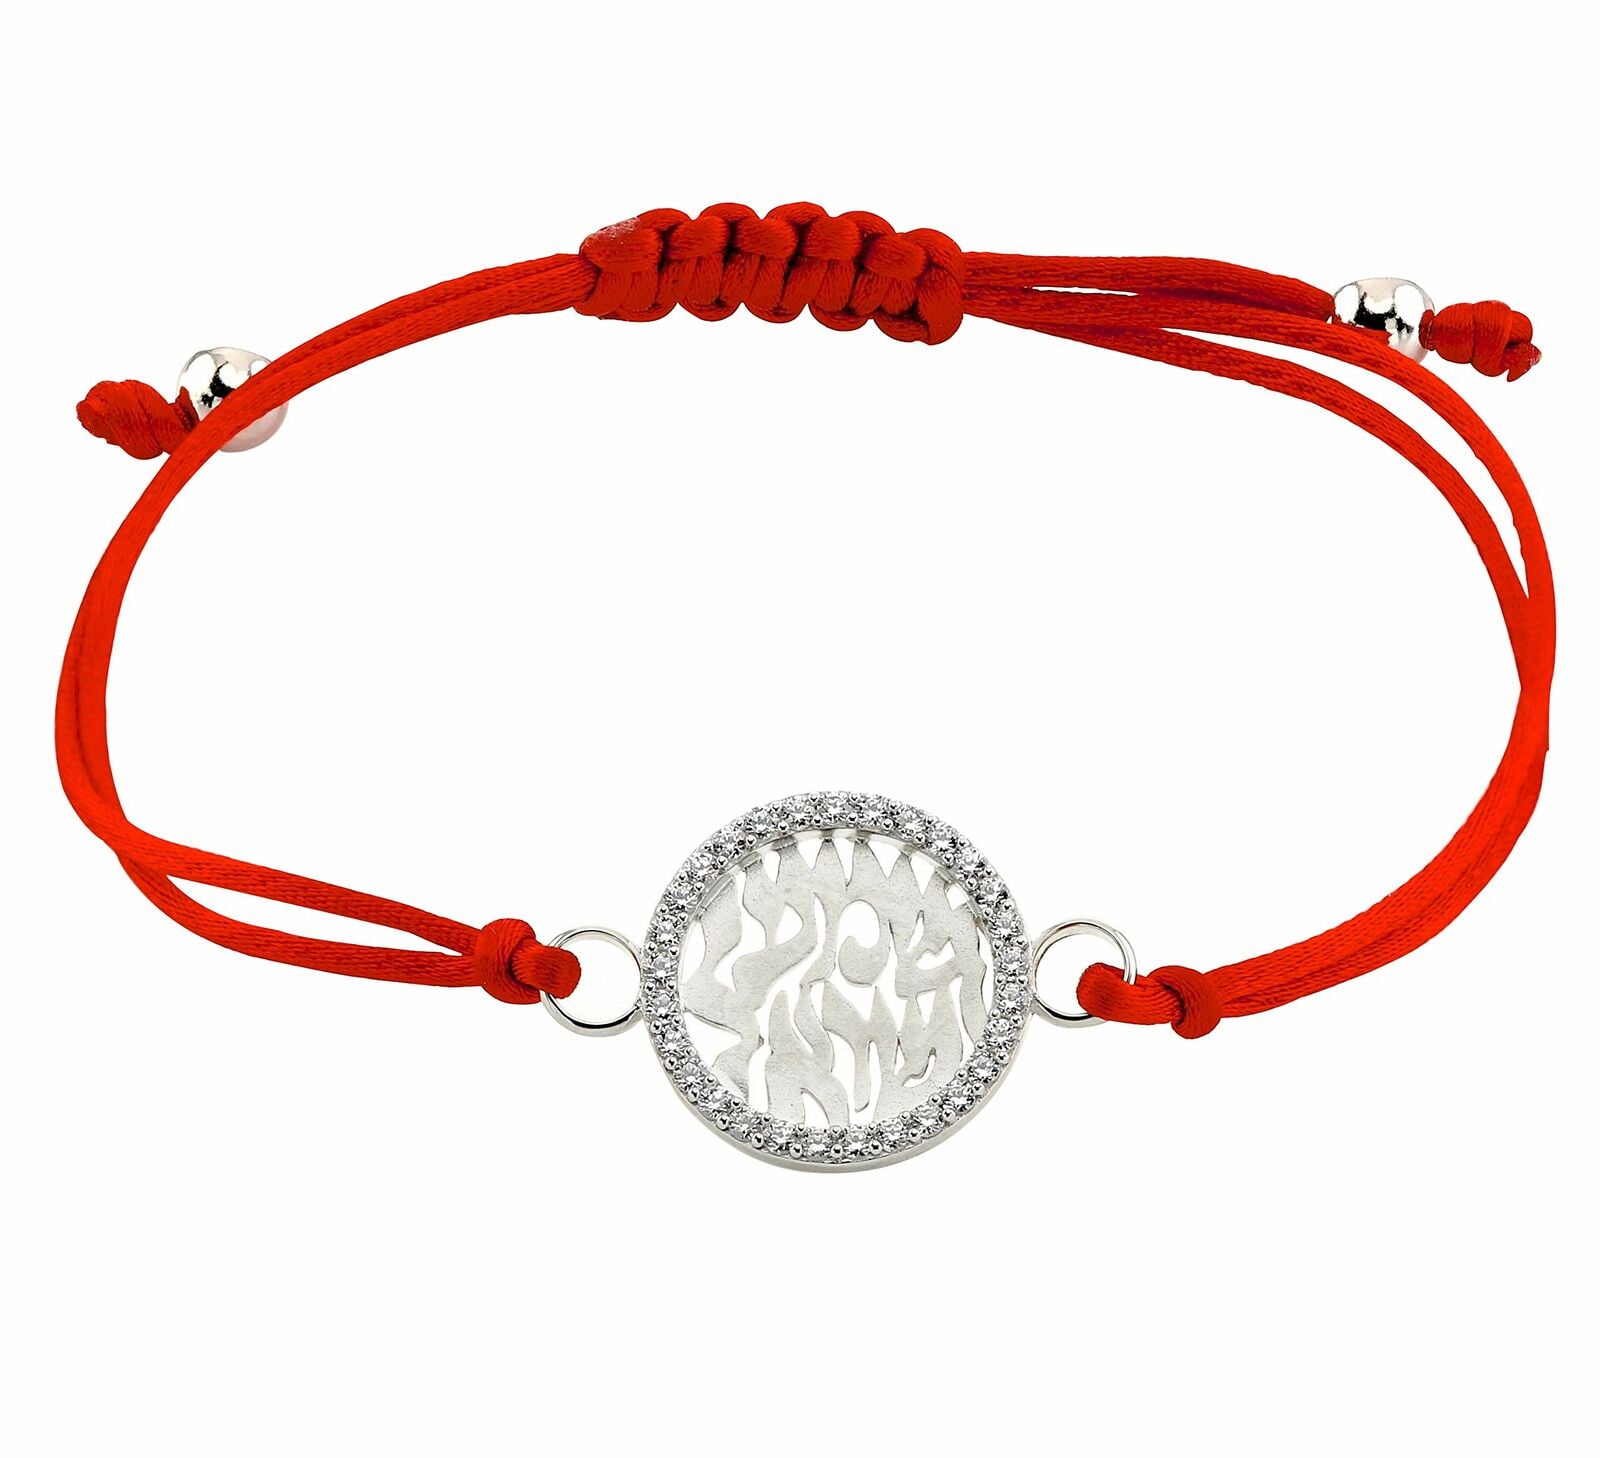 Red String Bracelet with Silver